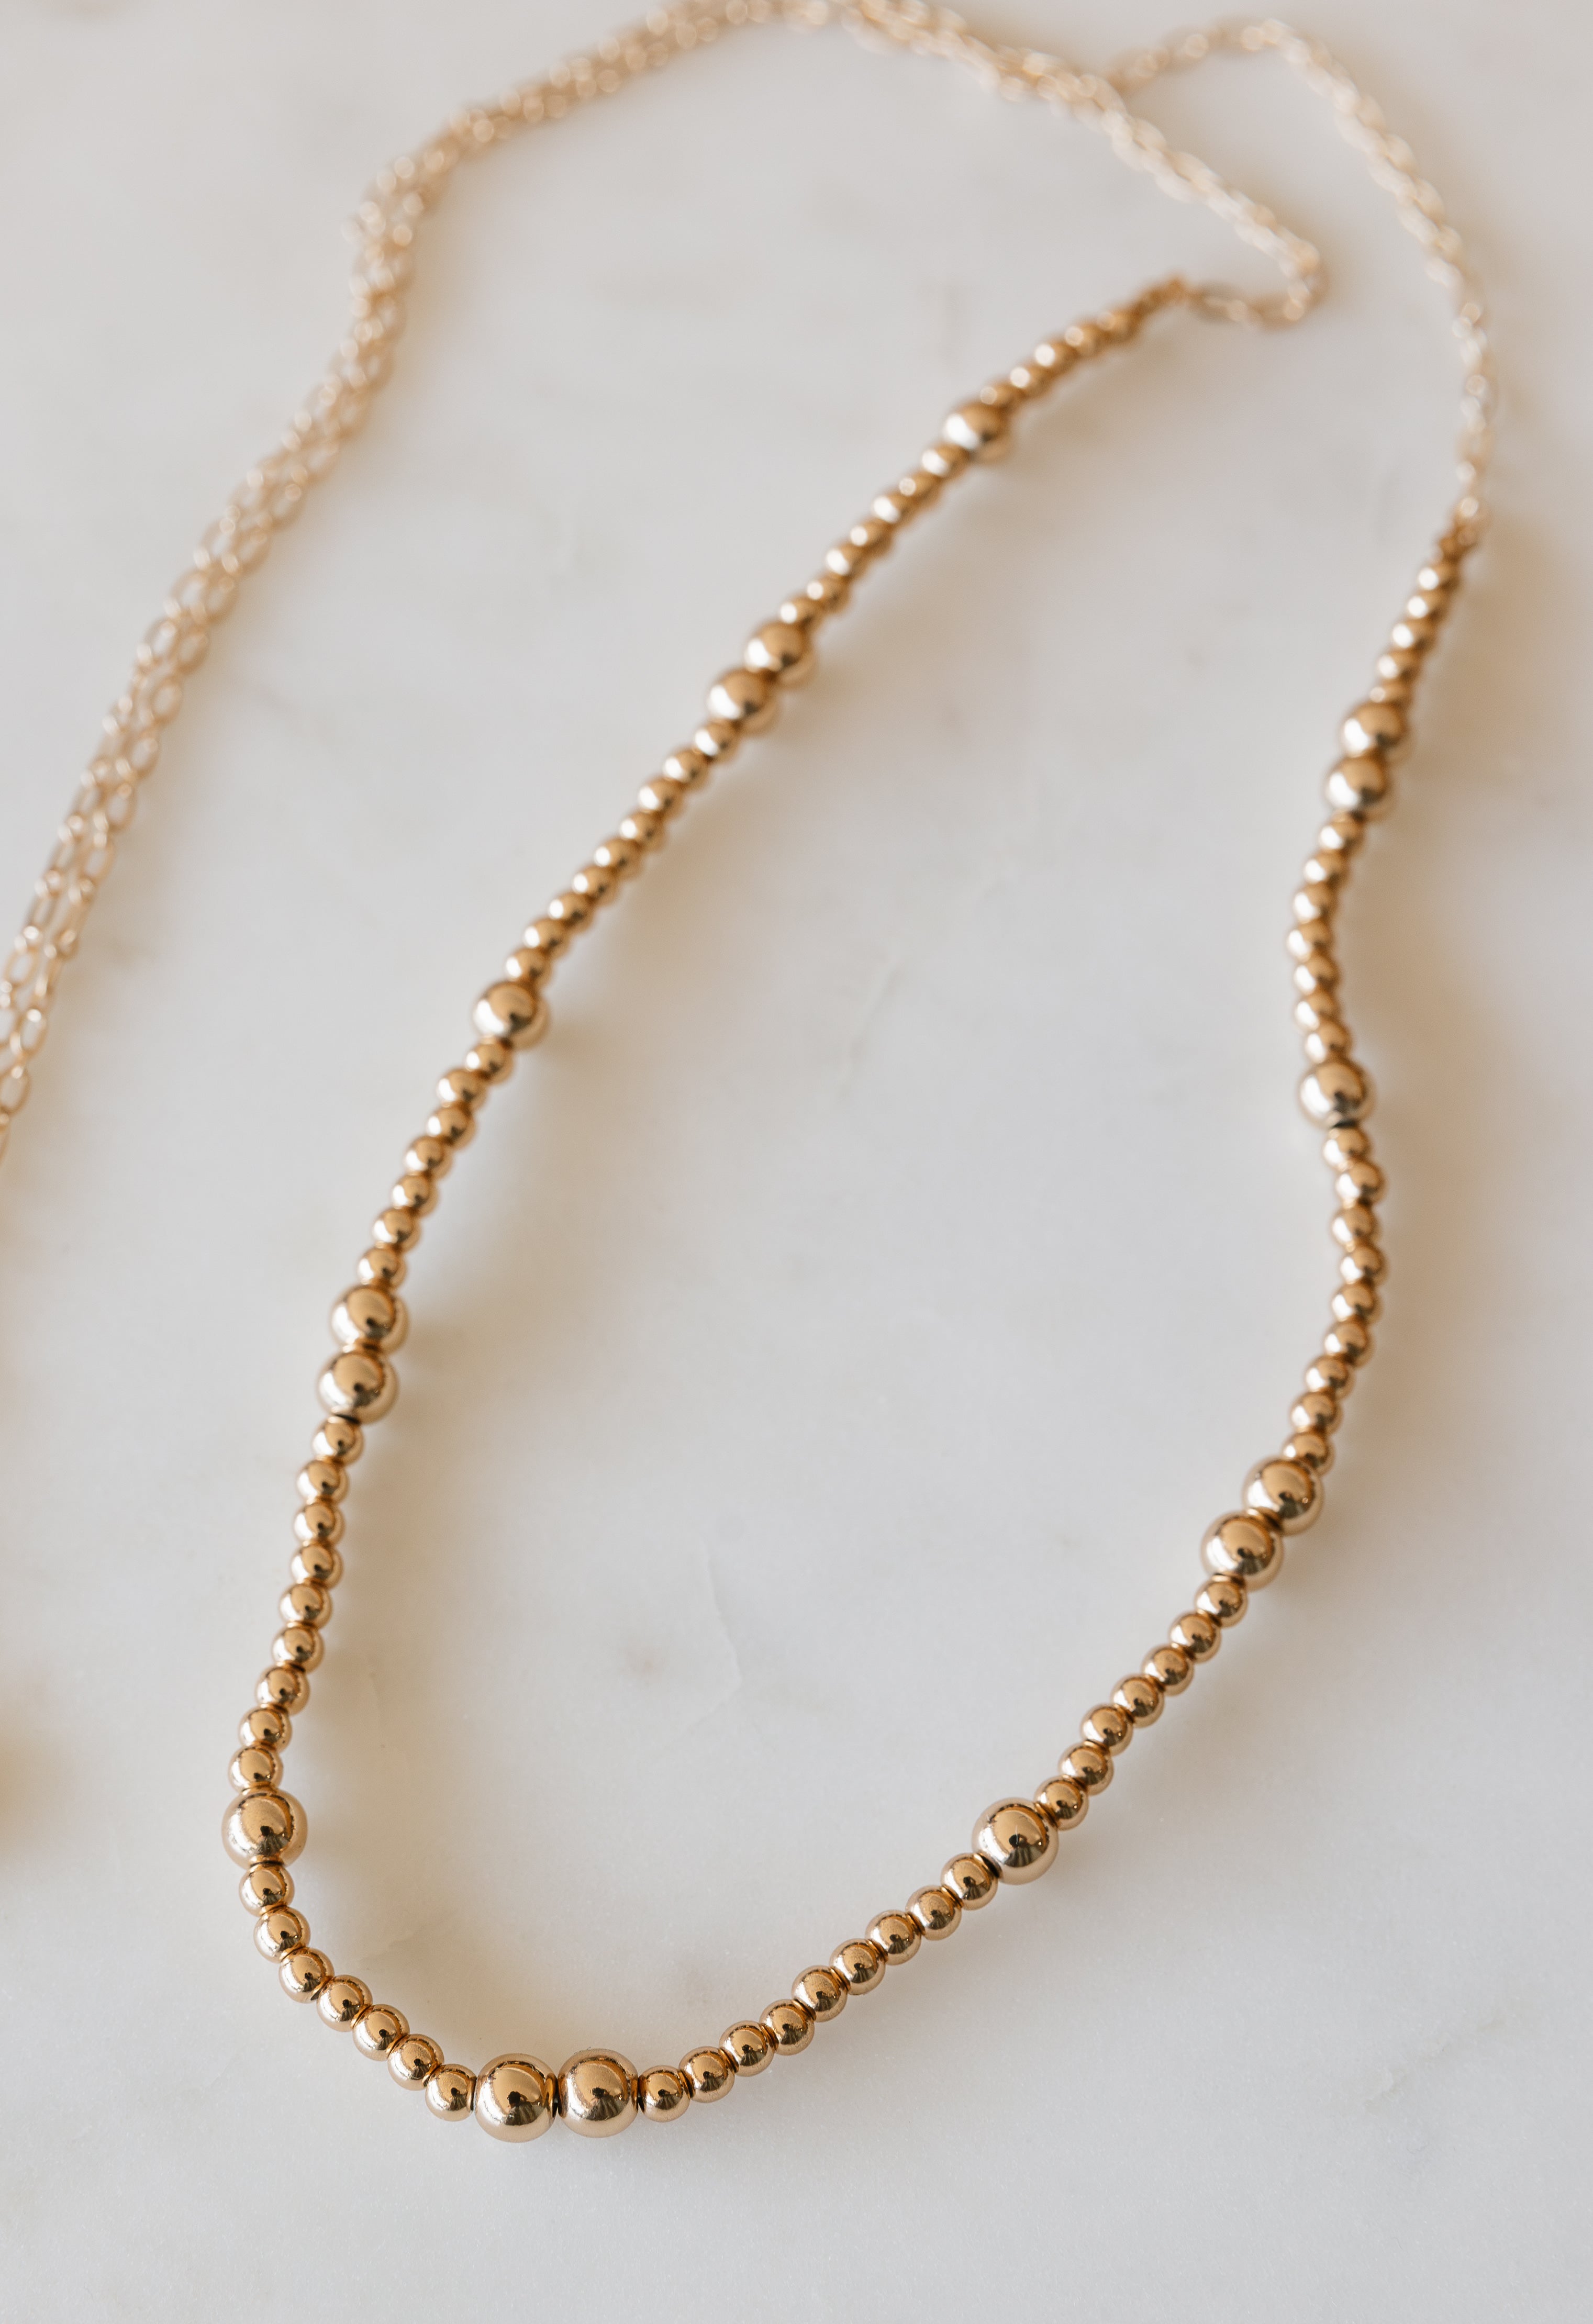 Sorrento Necklace - GOLD - willows clothing NECKLACE